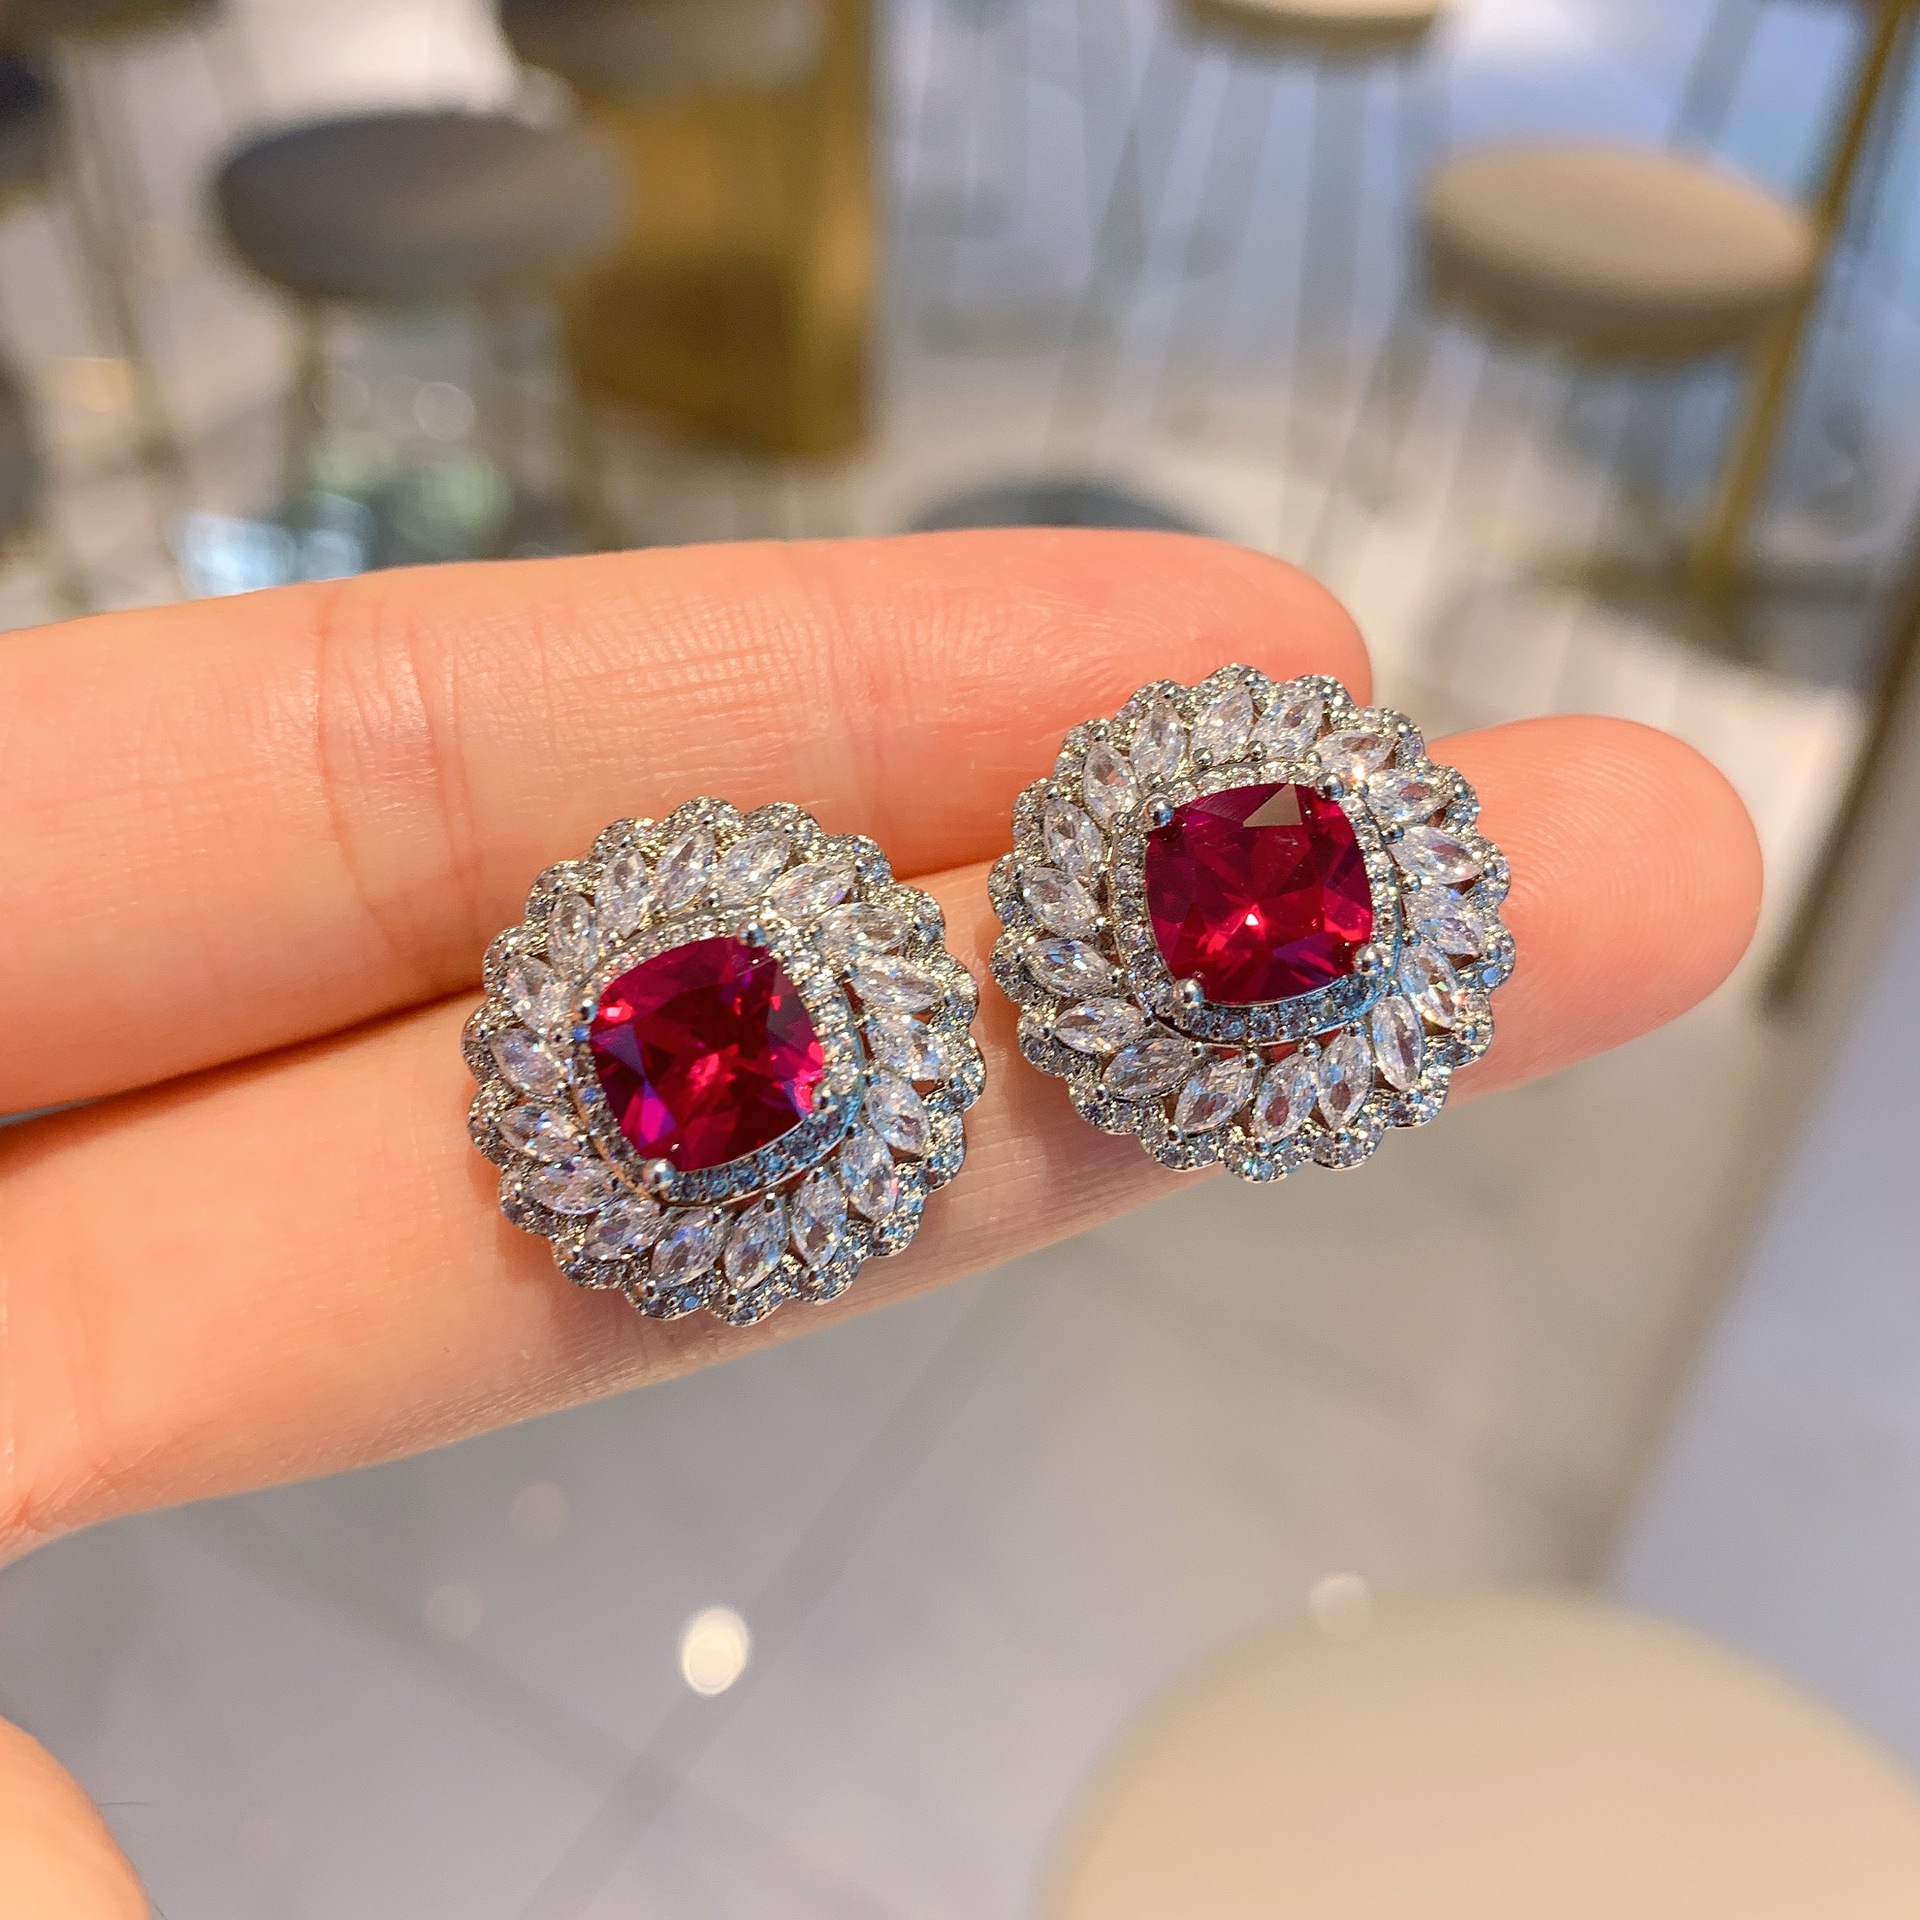 Zhuang Sheng Jewelry European and American Imitation Pigeons-Blood Ruby Square Luxury Inlaid Eardrops Stud Earrings Ring Jewelry Set